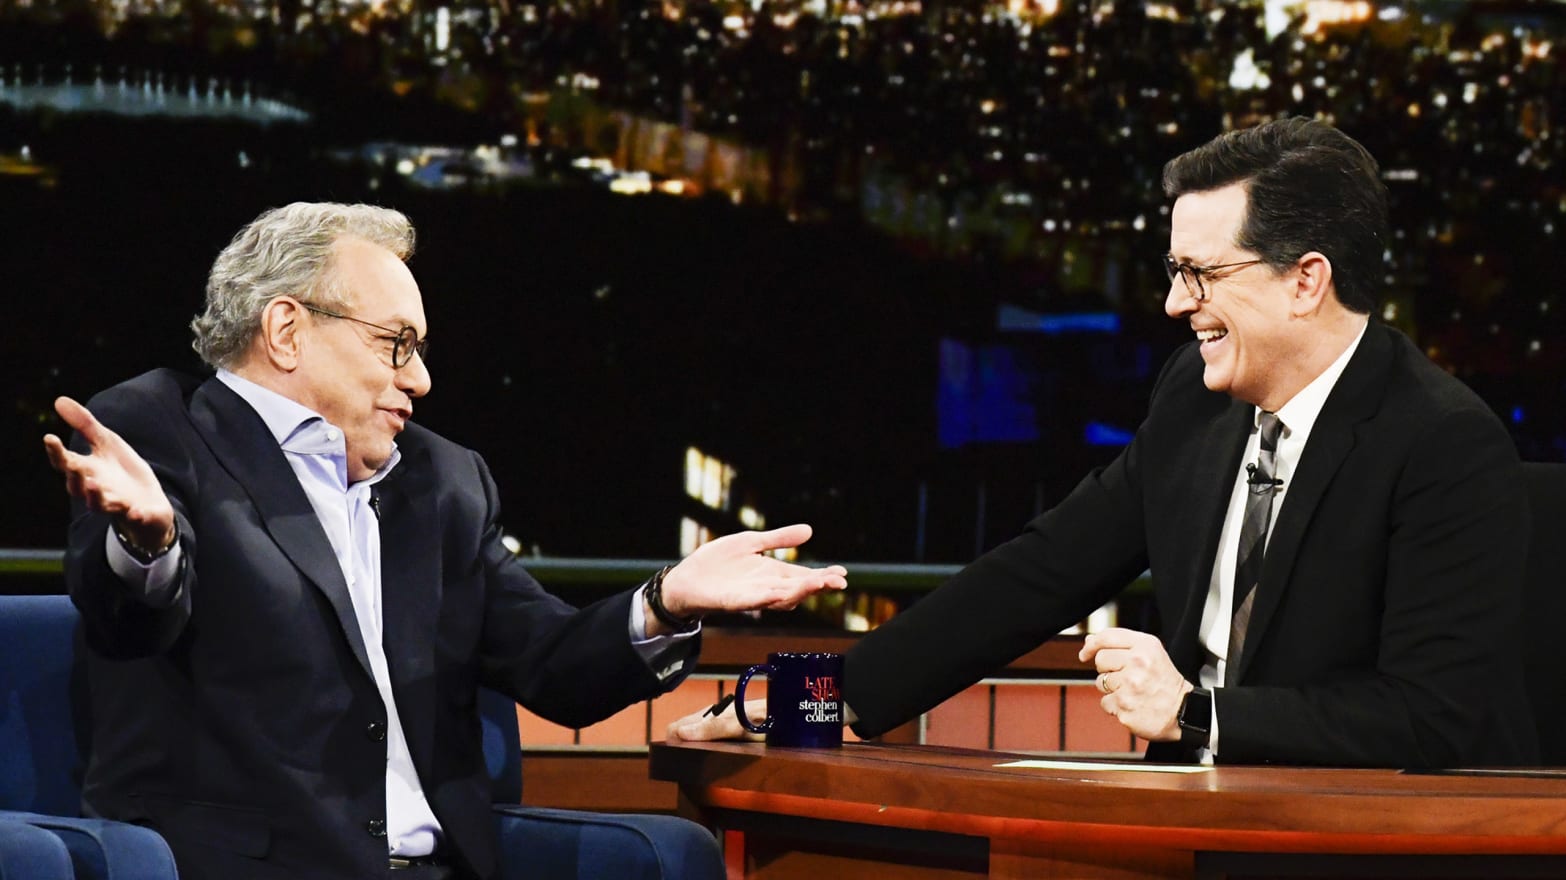 Lewis Black Goes Off on Trump’s ‘Bullsh*t and Insanity and Meanness’